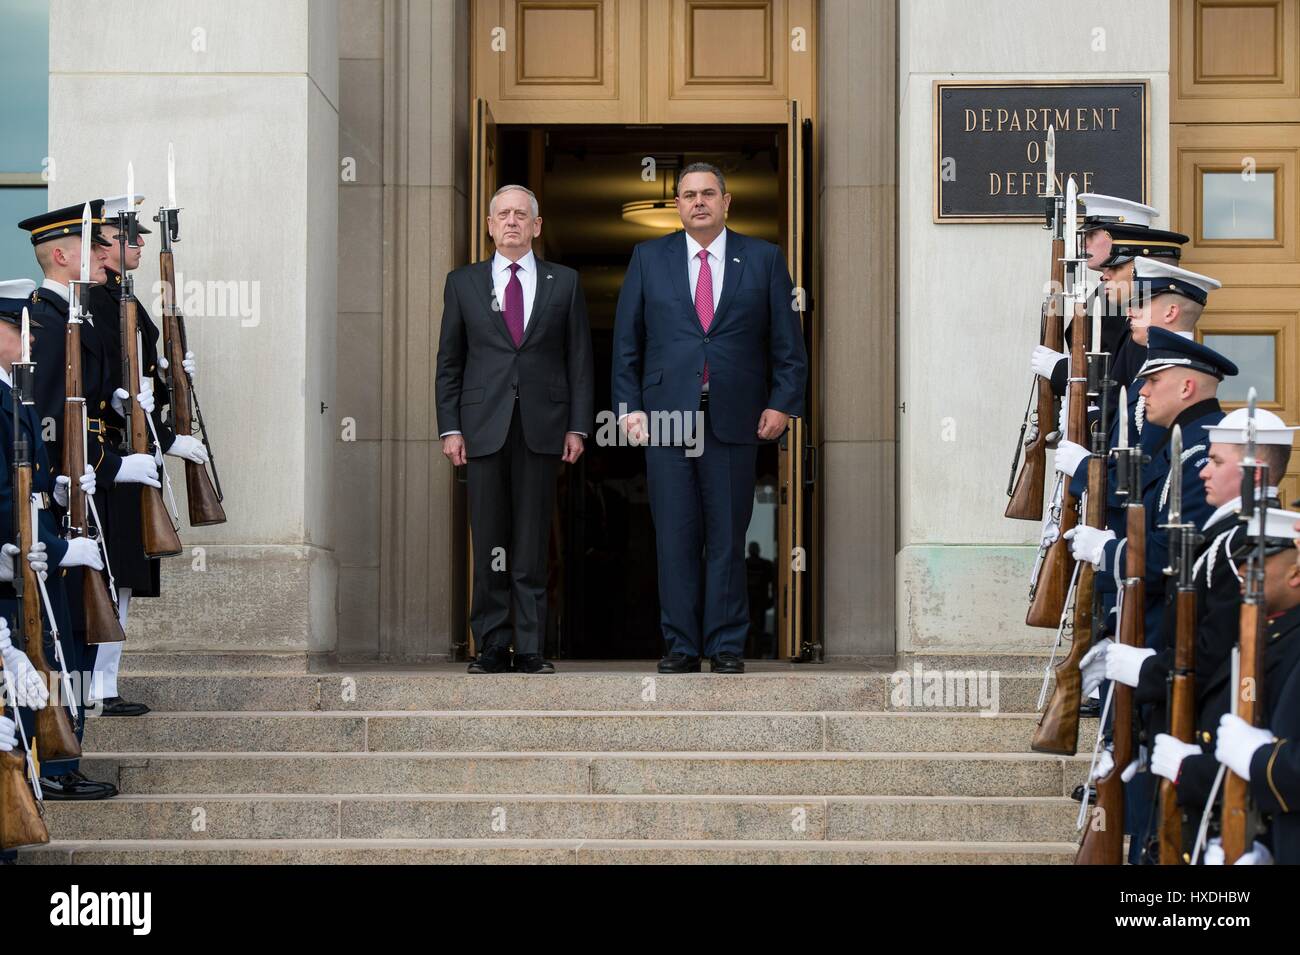 U.S. Secretary of Defense Jim Mattis and Greek Defense Minister Panos Kammenos, right, during the arrival ceremony at the Pentagon March 24, 2017 in Arlington, Virginia. Stock Photo